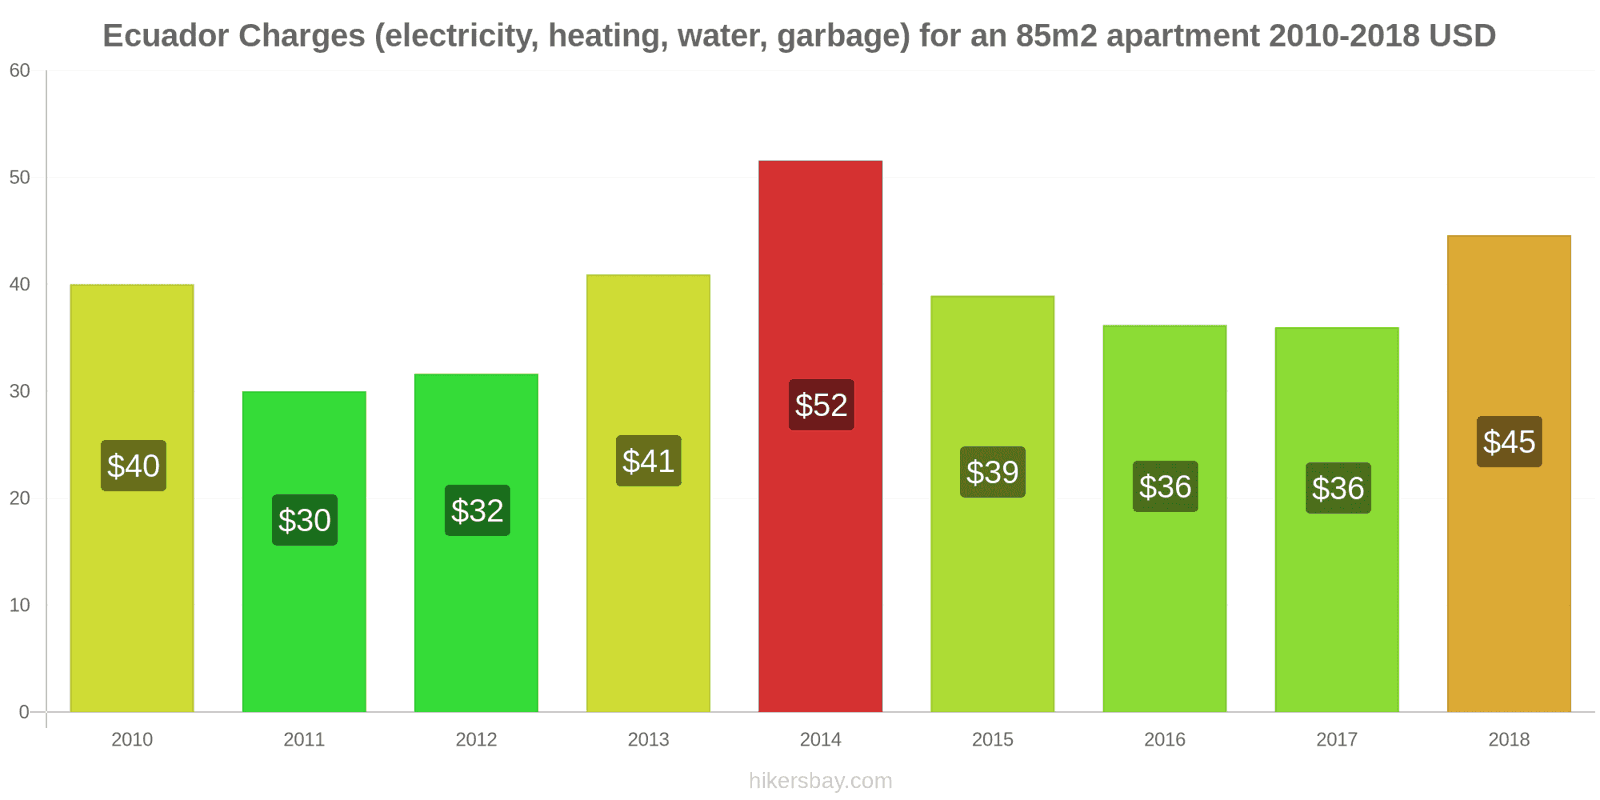 Ecuador price changes Utilities (electricity, heating, water, garbage) for an 85m2 apartment hikersbay.com